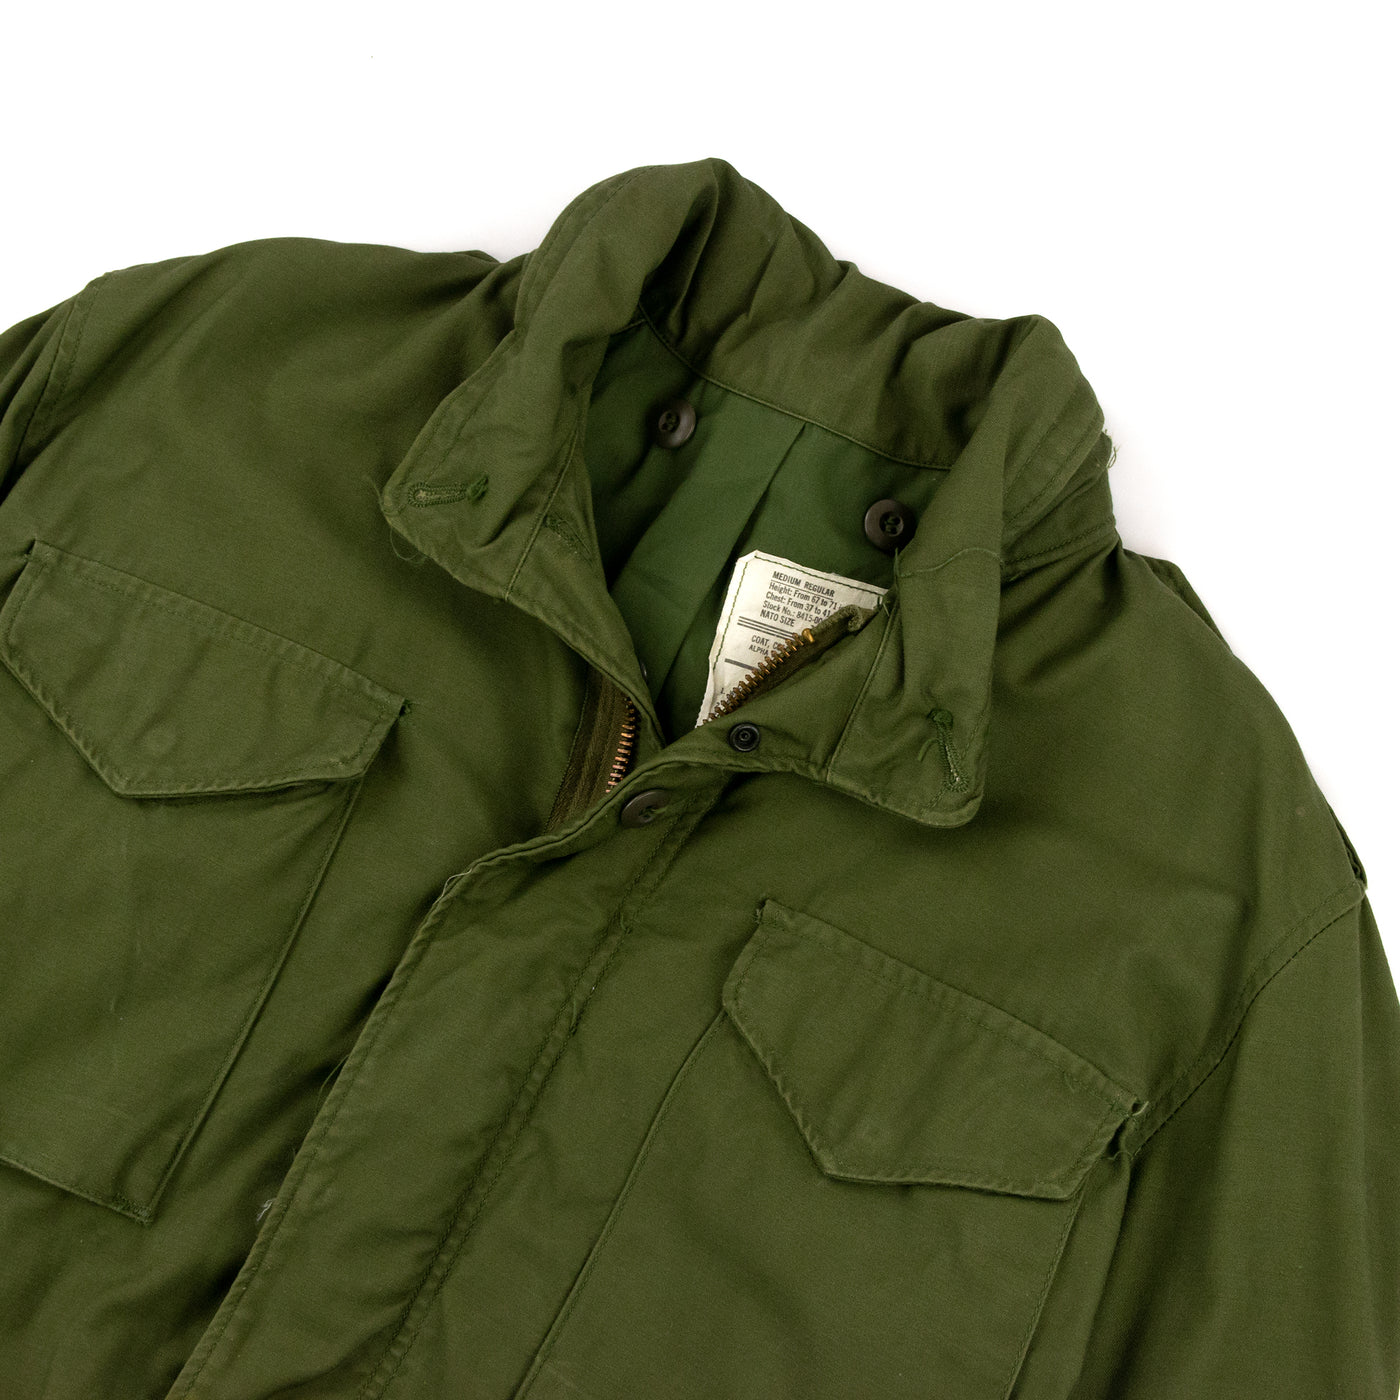 Vintage US Army Alpha Industries M-65 Cotton Sateen Military Field Jacket 0G-107 Green - M Front